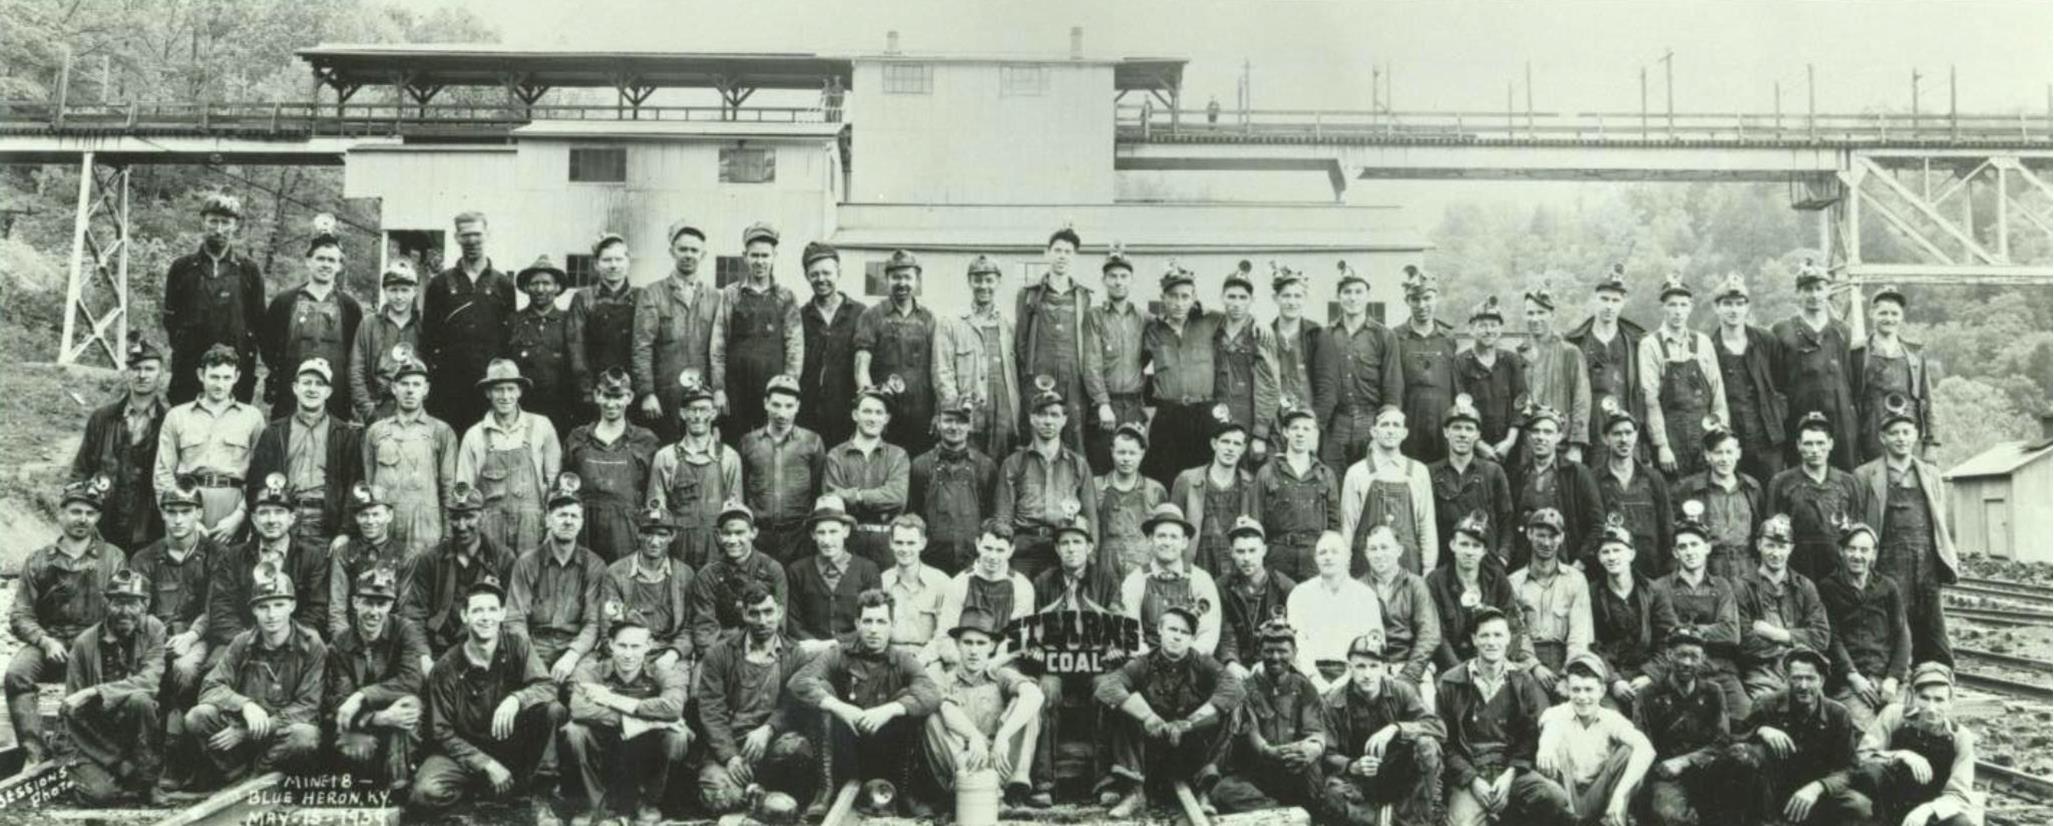 Coal miners gathered together for group photo